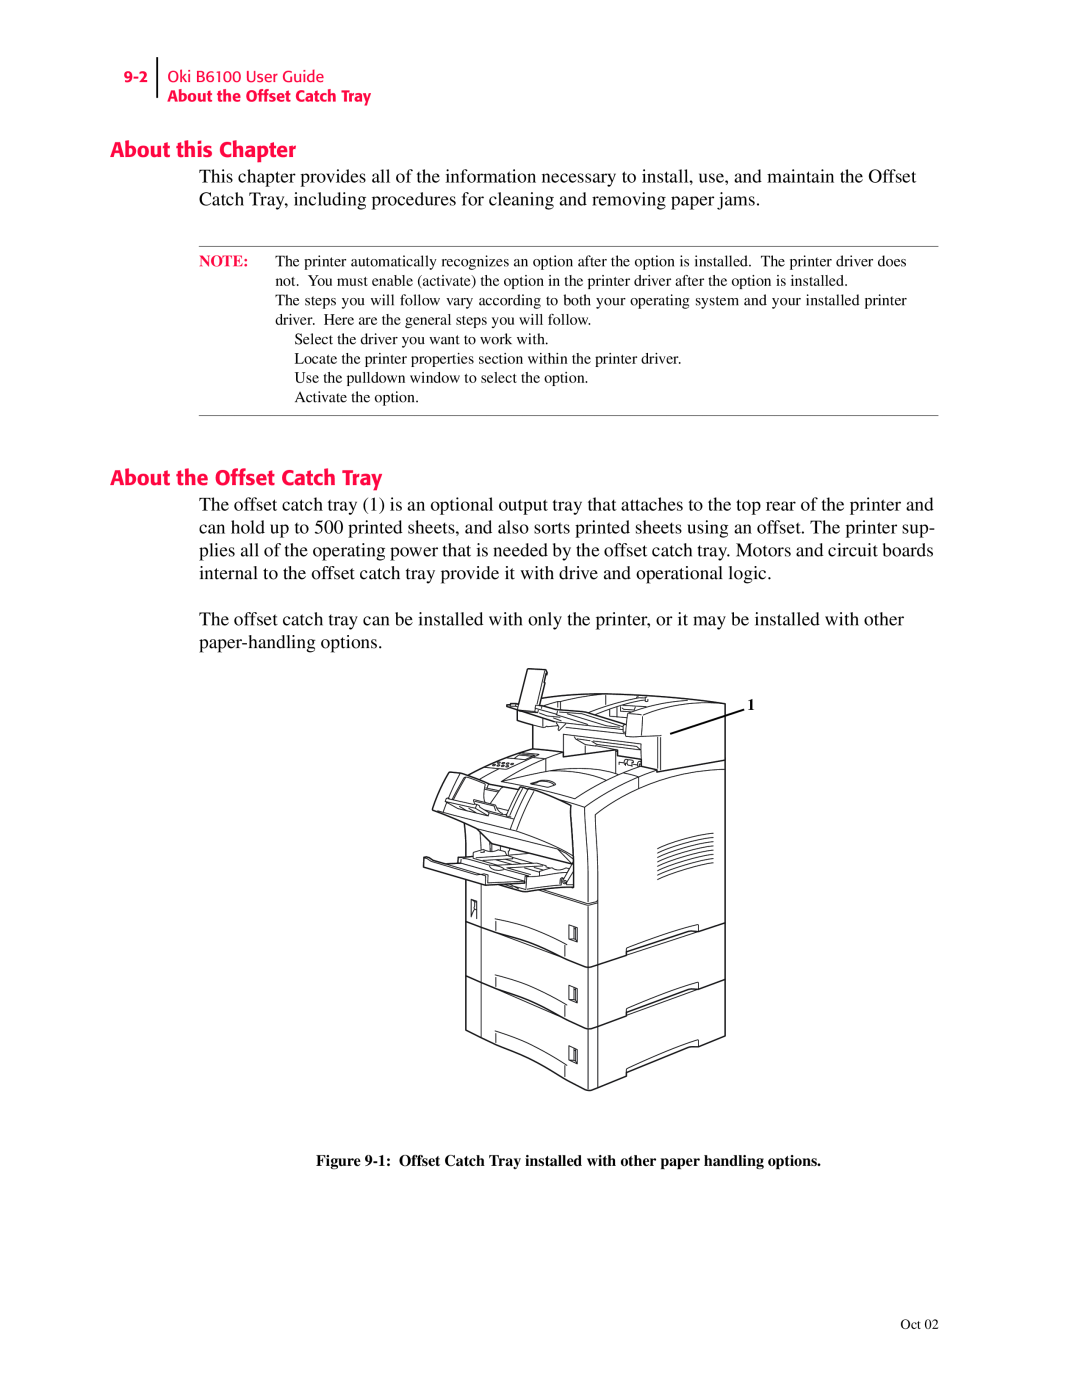 Oki manual About this Chapter, Oki B6100 User Guide About the Offset Catch Tray 